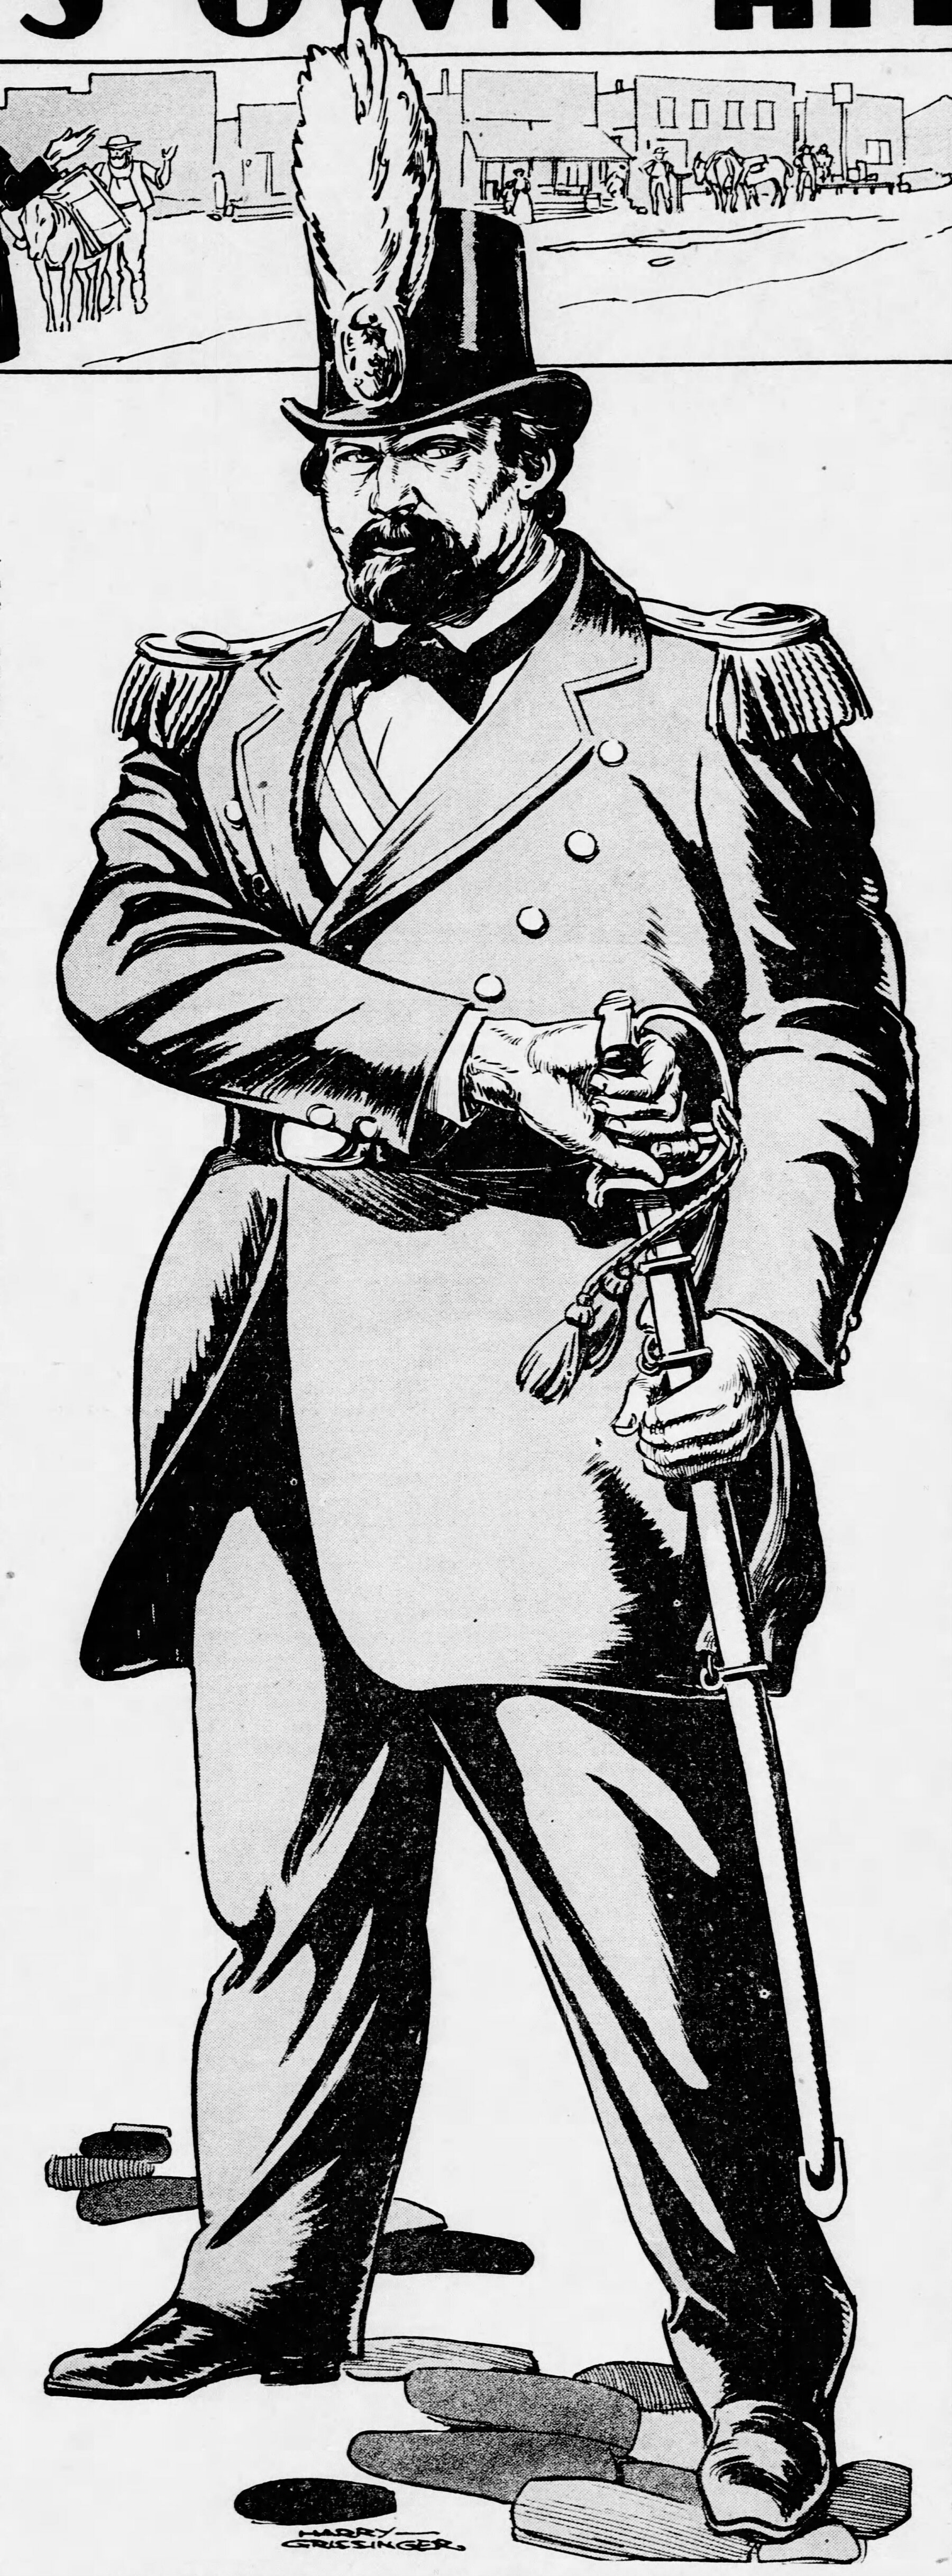   Emperor Norton, 1939, by Harry Ross Grissinger (1887–1966)  for the Newspaper Enterprise Association (NEA).   Lead illustration for feature, “America’s Own ‘Hitler,’”  The Arizona Republic , 23 April 1939, Section 5 (Sunday magazine), p. 7. Source: